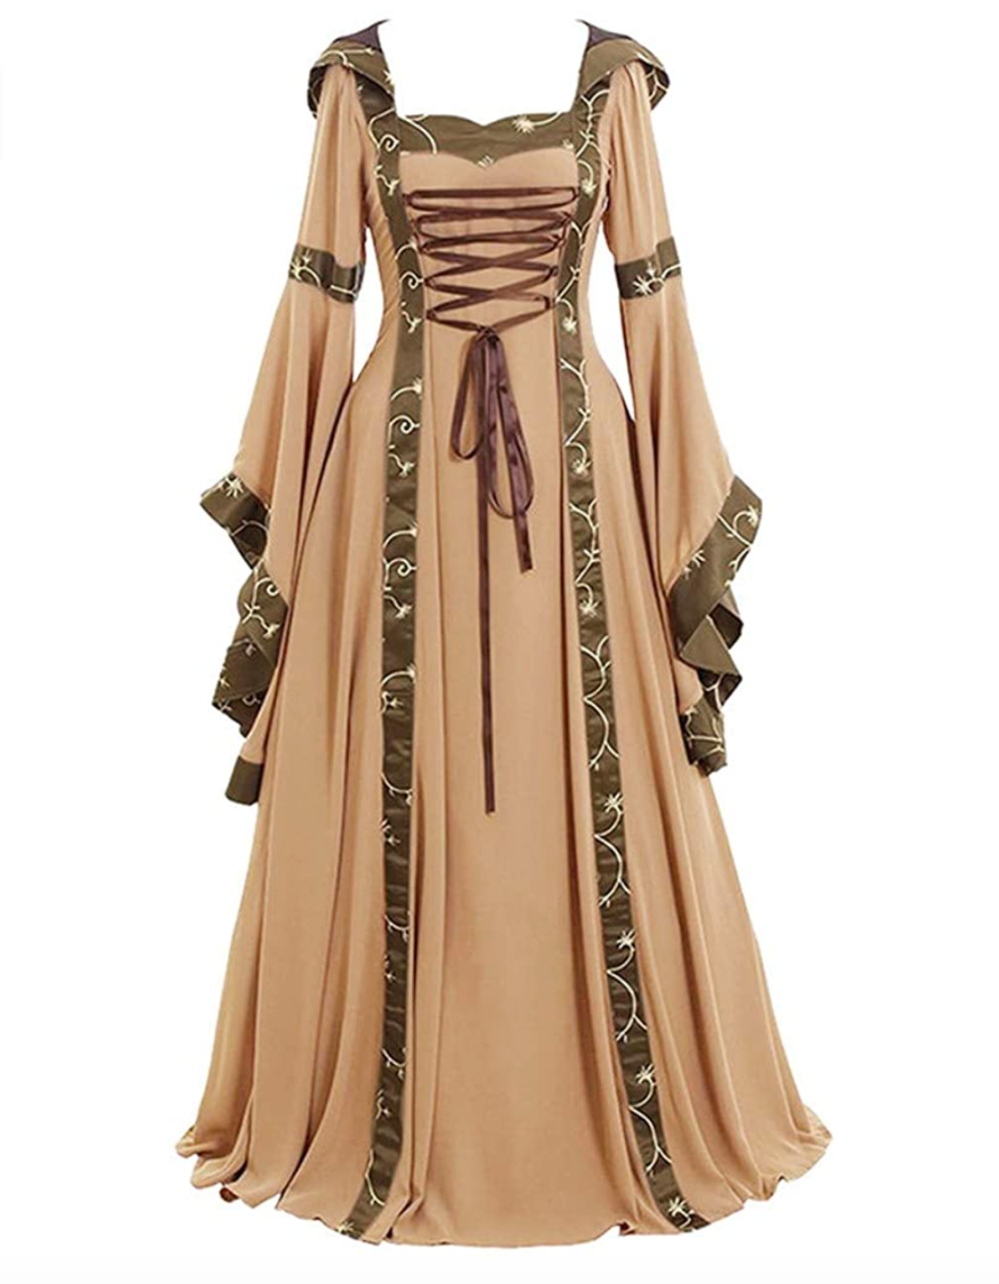 Forthery Womens Medieval Costume Dress